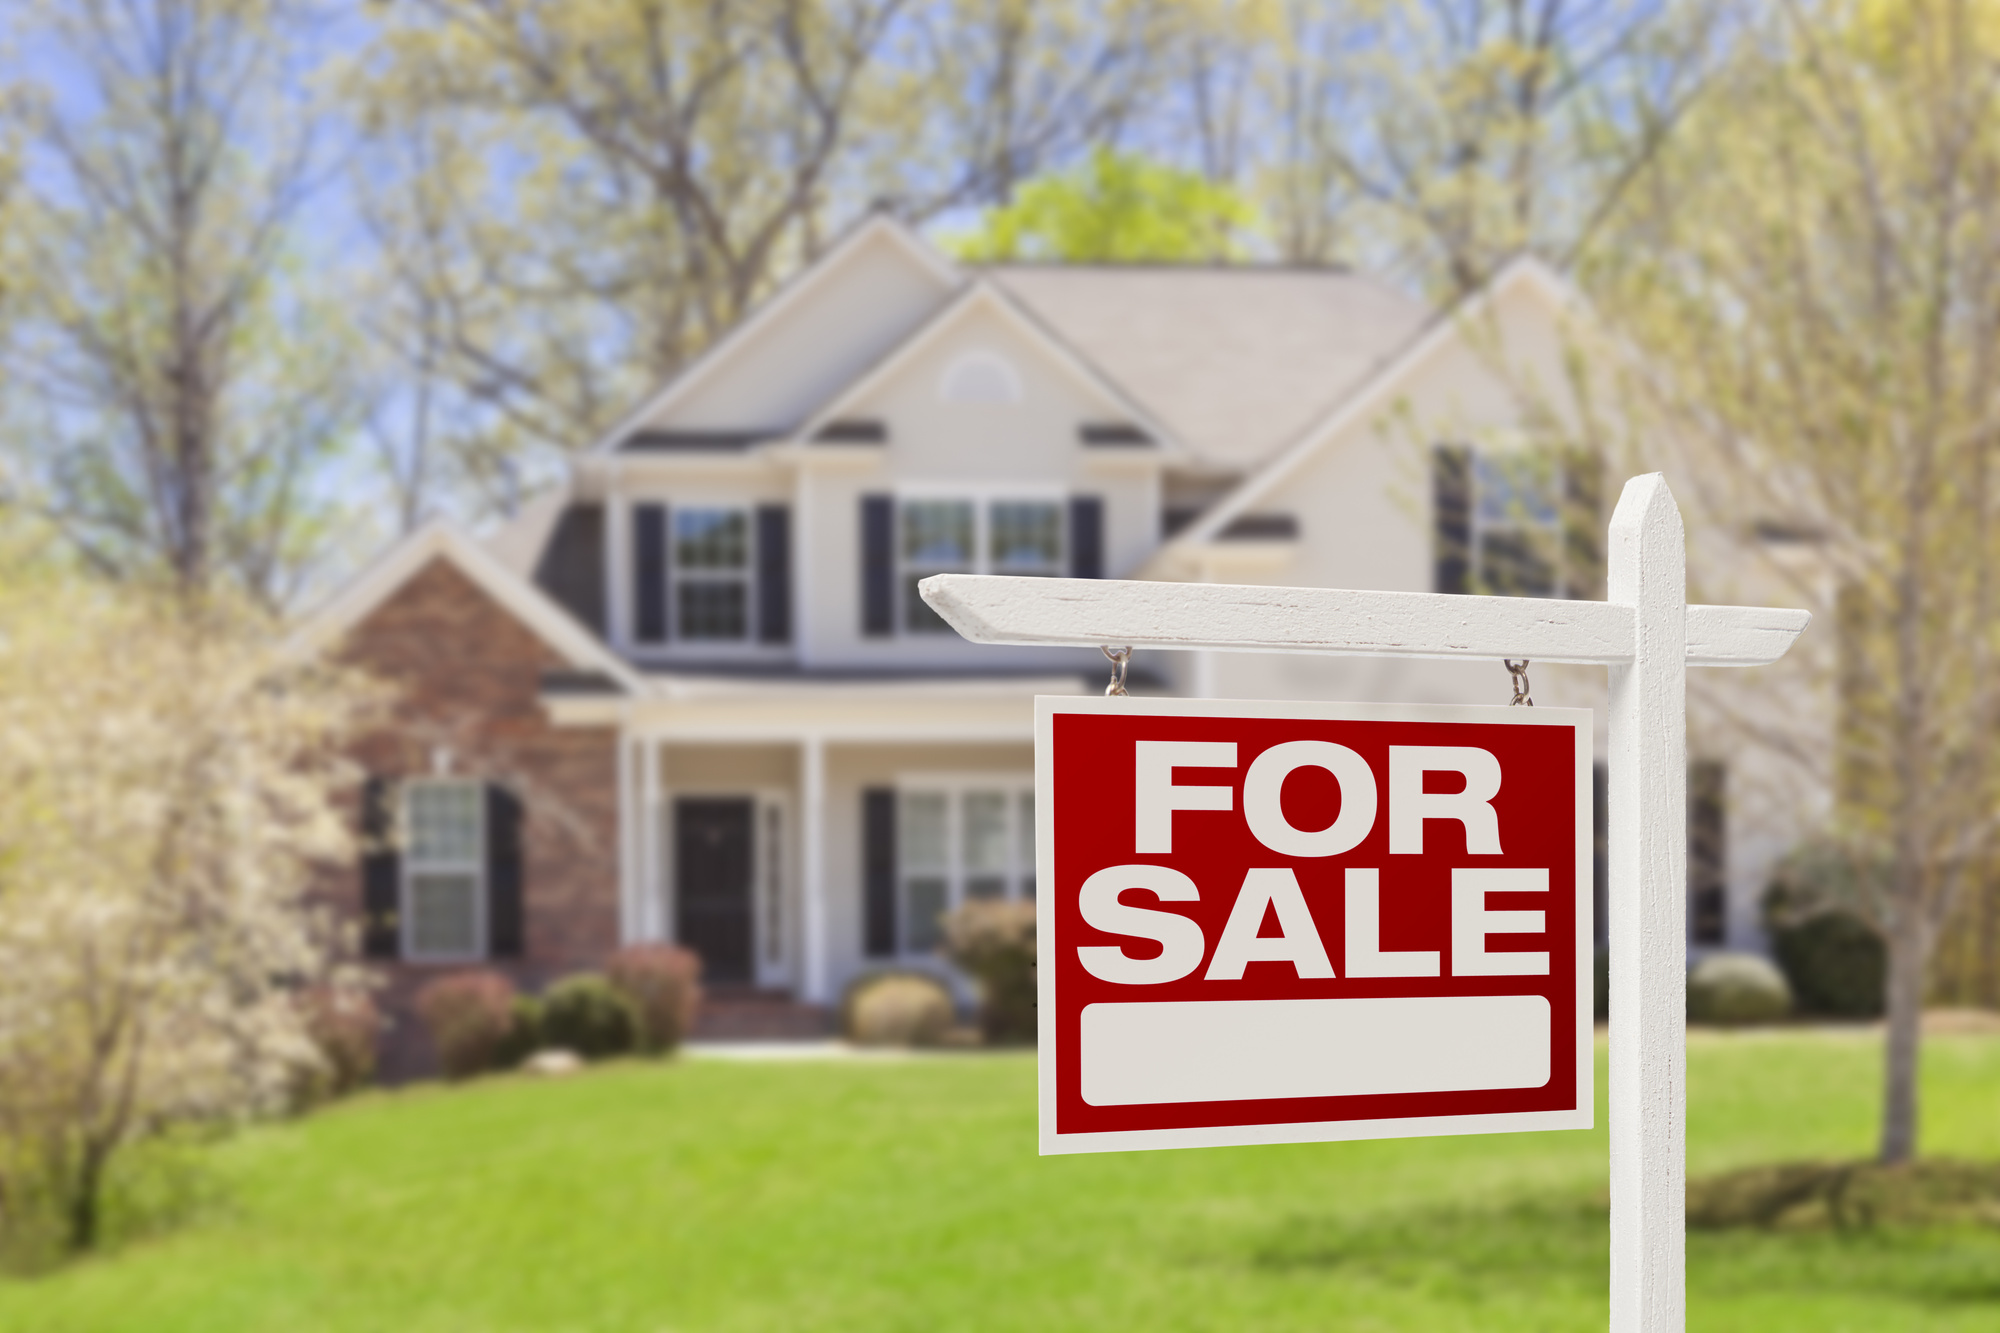 If you're ready for a move, you may need to first sell your house. Here are some of our greatest tips for selling a home fast.